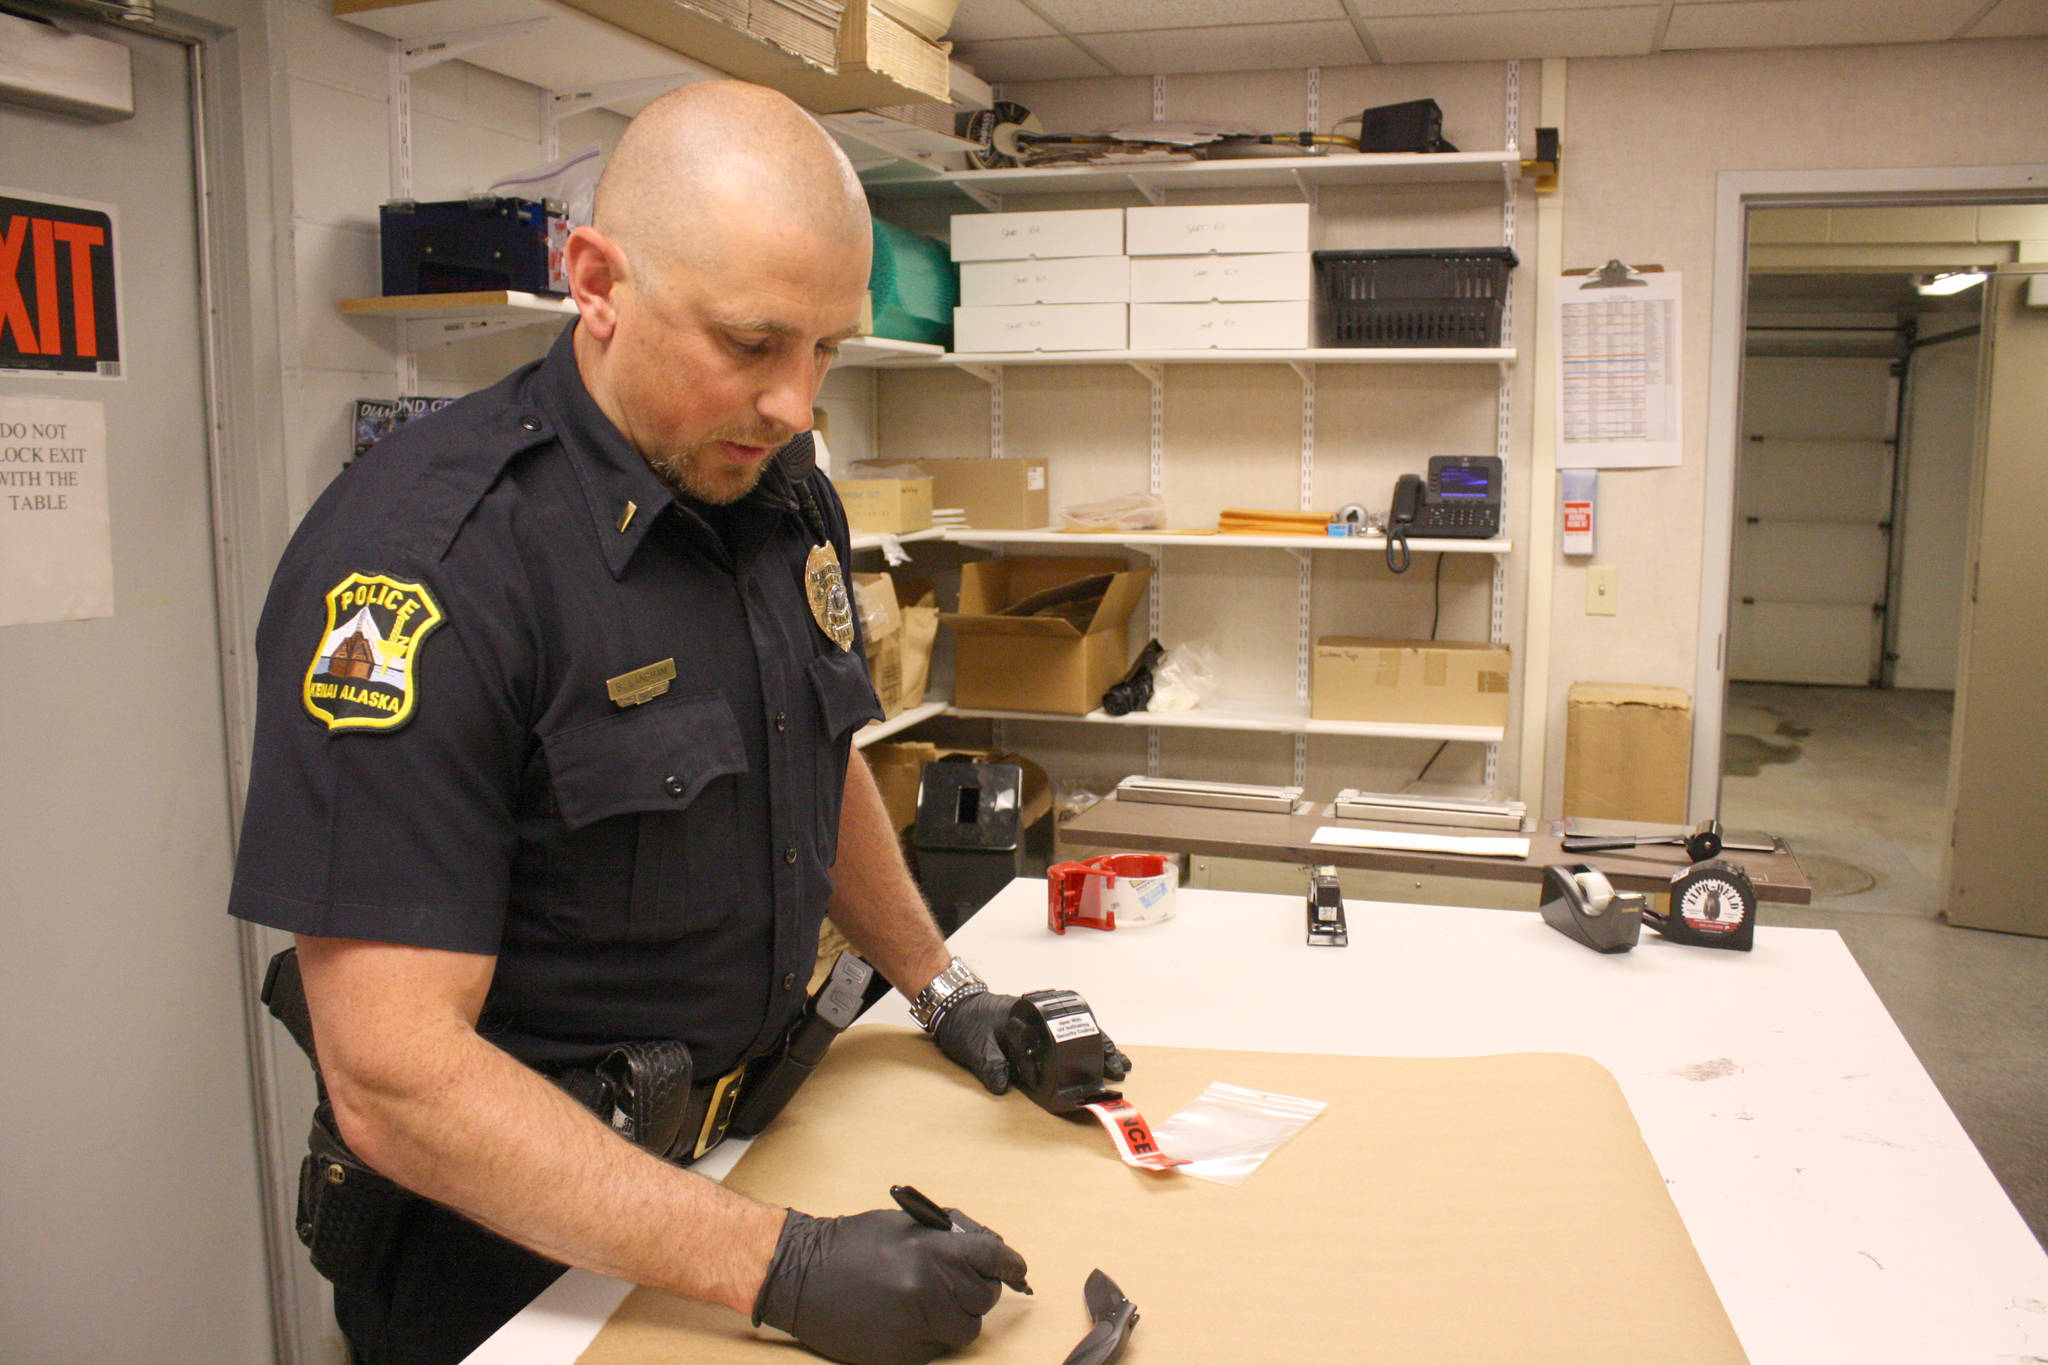 Kenai Police Lt. Ben Langham demonstrates how police prepare evidence for storage on Thursday at Kenai Police Department headquarters on Thursday. (Photo by Erin Thompson/Peninsula Clarion)